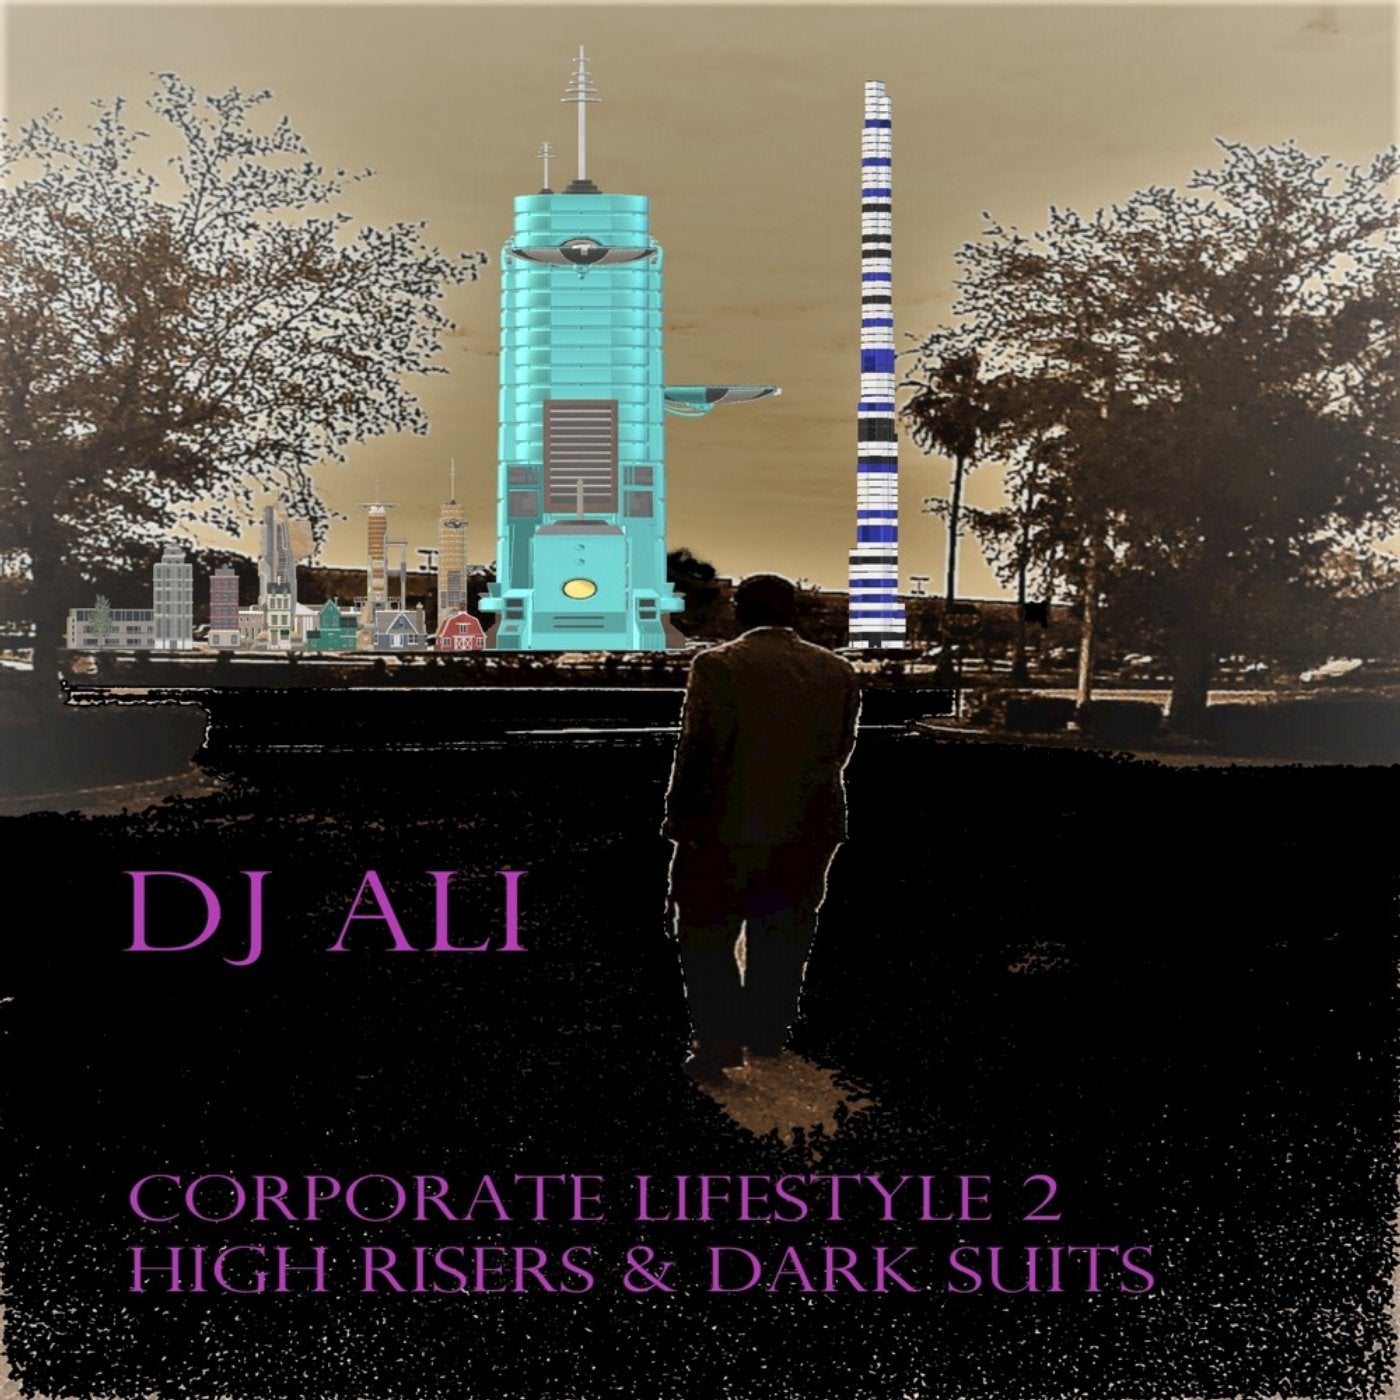 Corporate Lifestyle 2: High Risers & Dark Suits